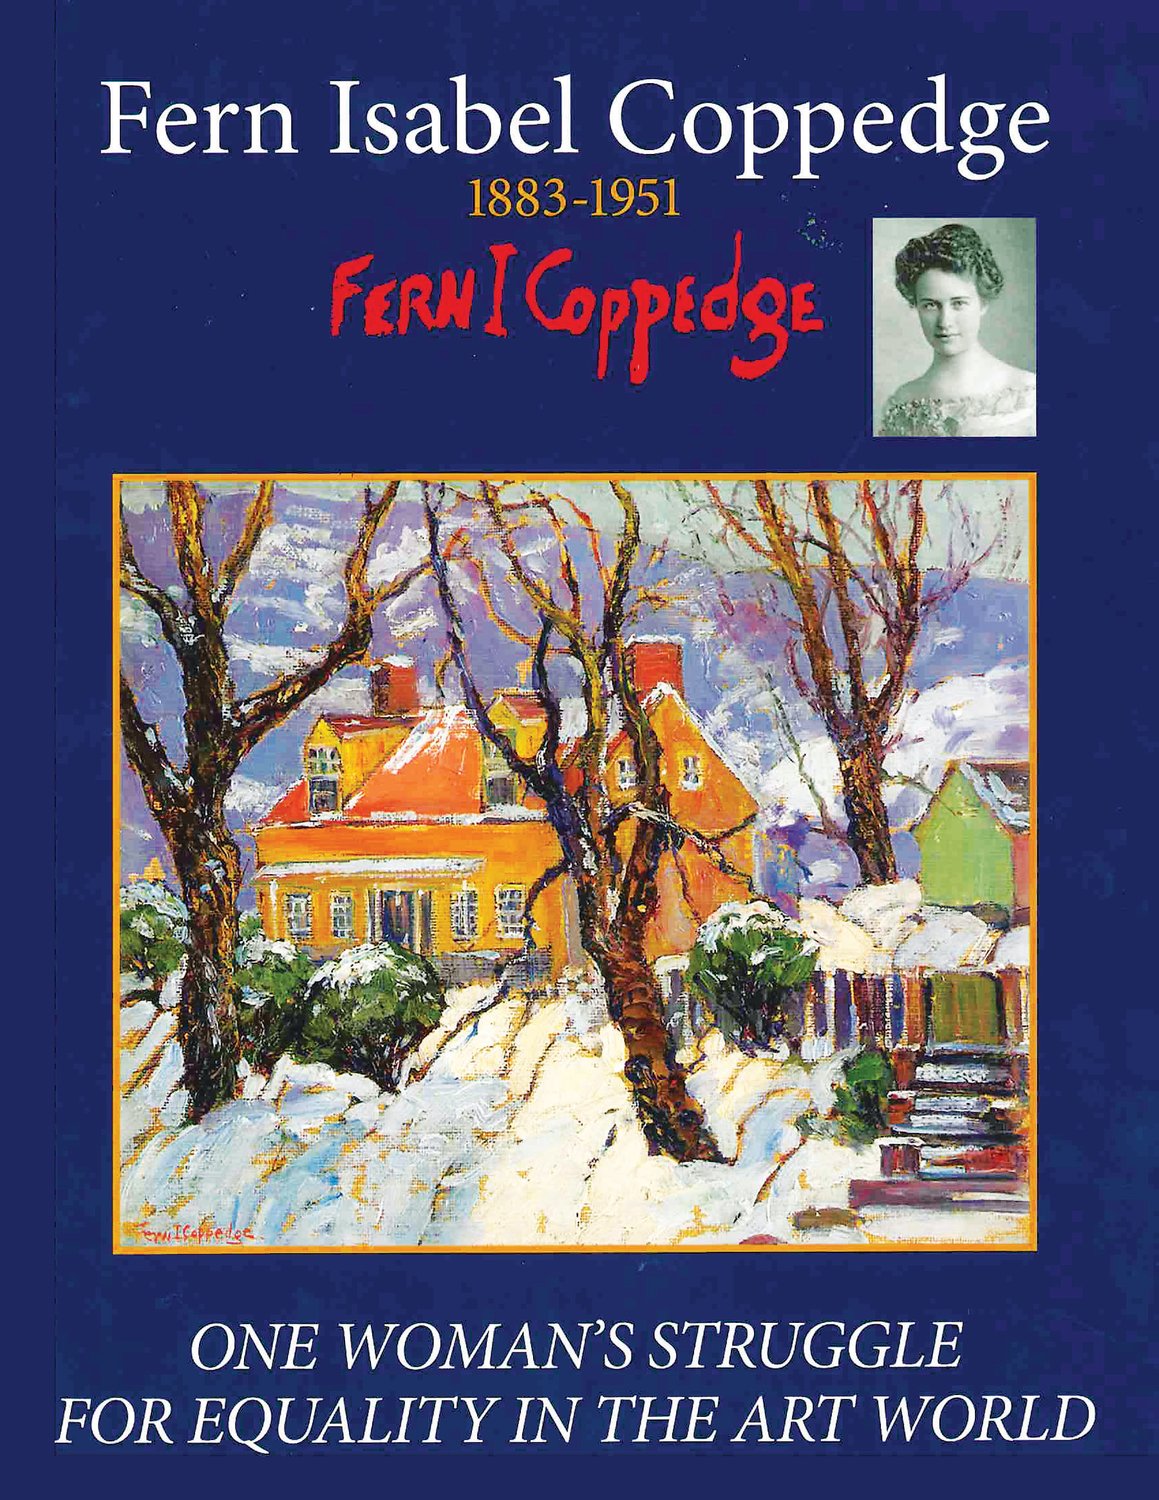 The cover of “Fern Coppedge: One Woman’s Struggle for Equality in the Art World” shows a painting of the artist’s home in Lumberville.